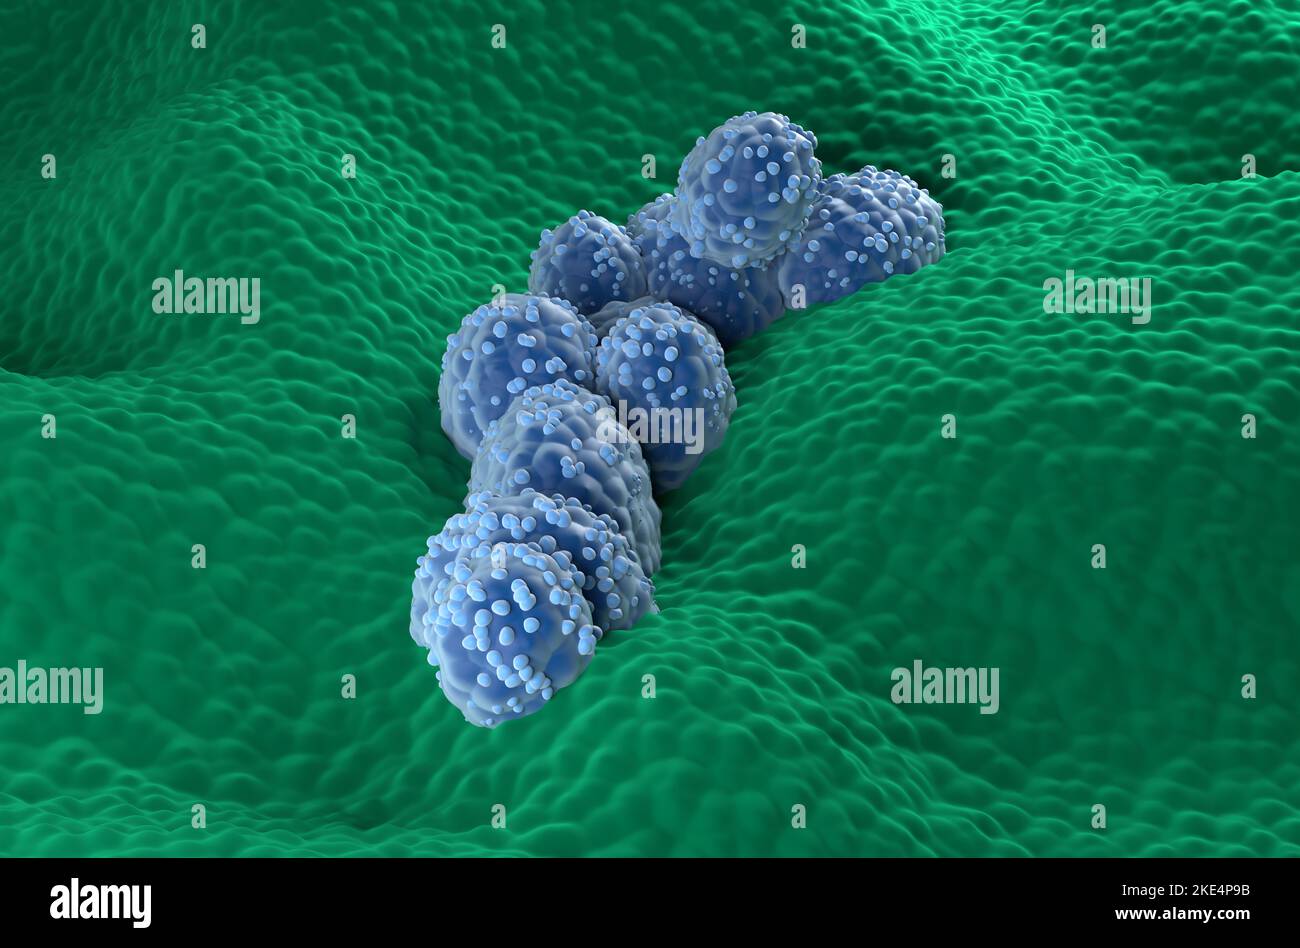 Prostate cancer cells in the prostatic glandular epithelium - front view 3d illustration Stock Photo